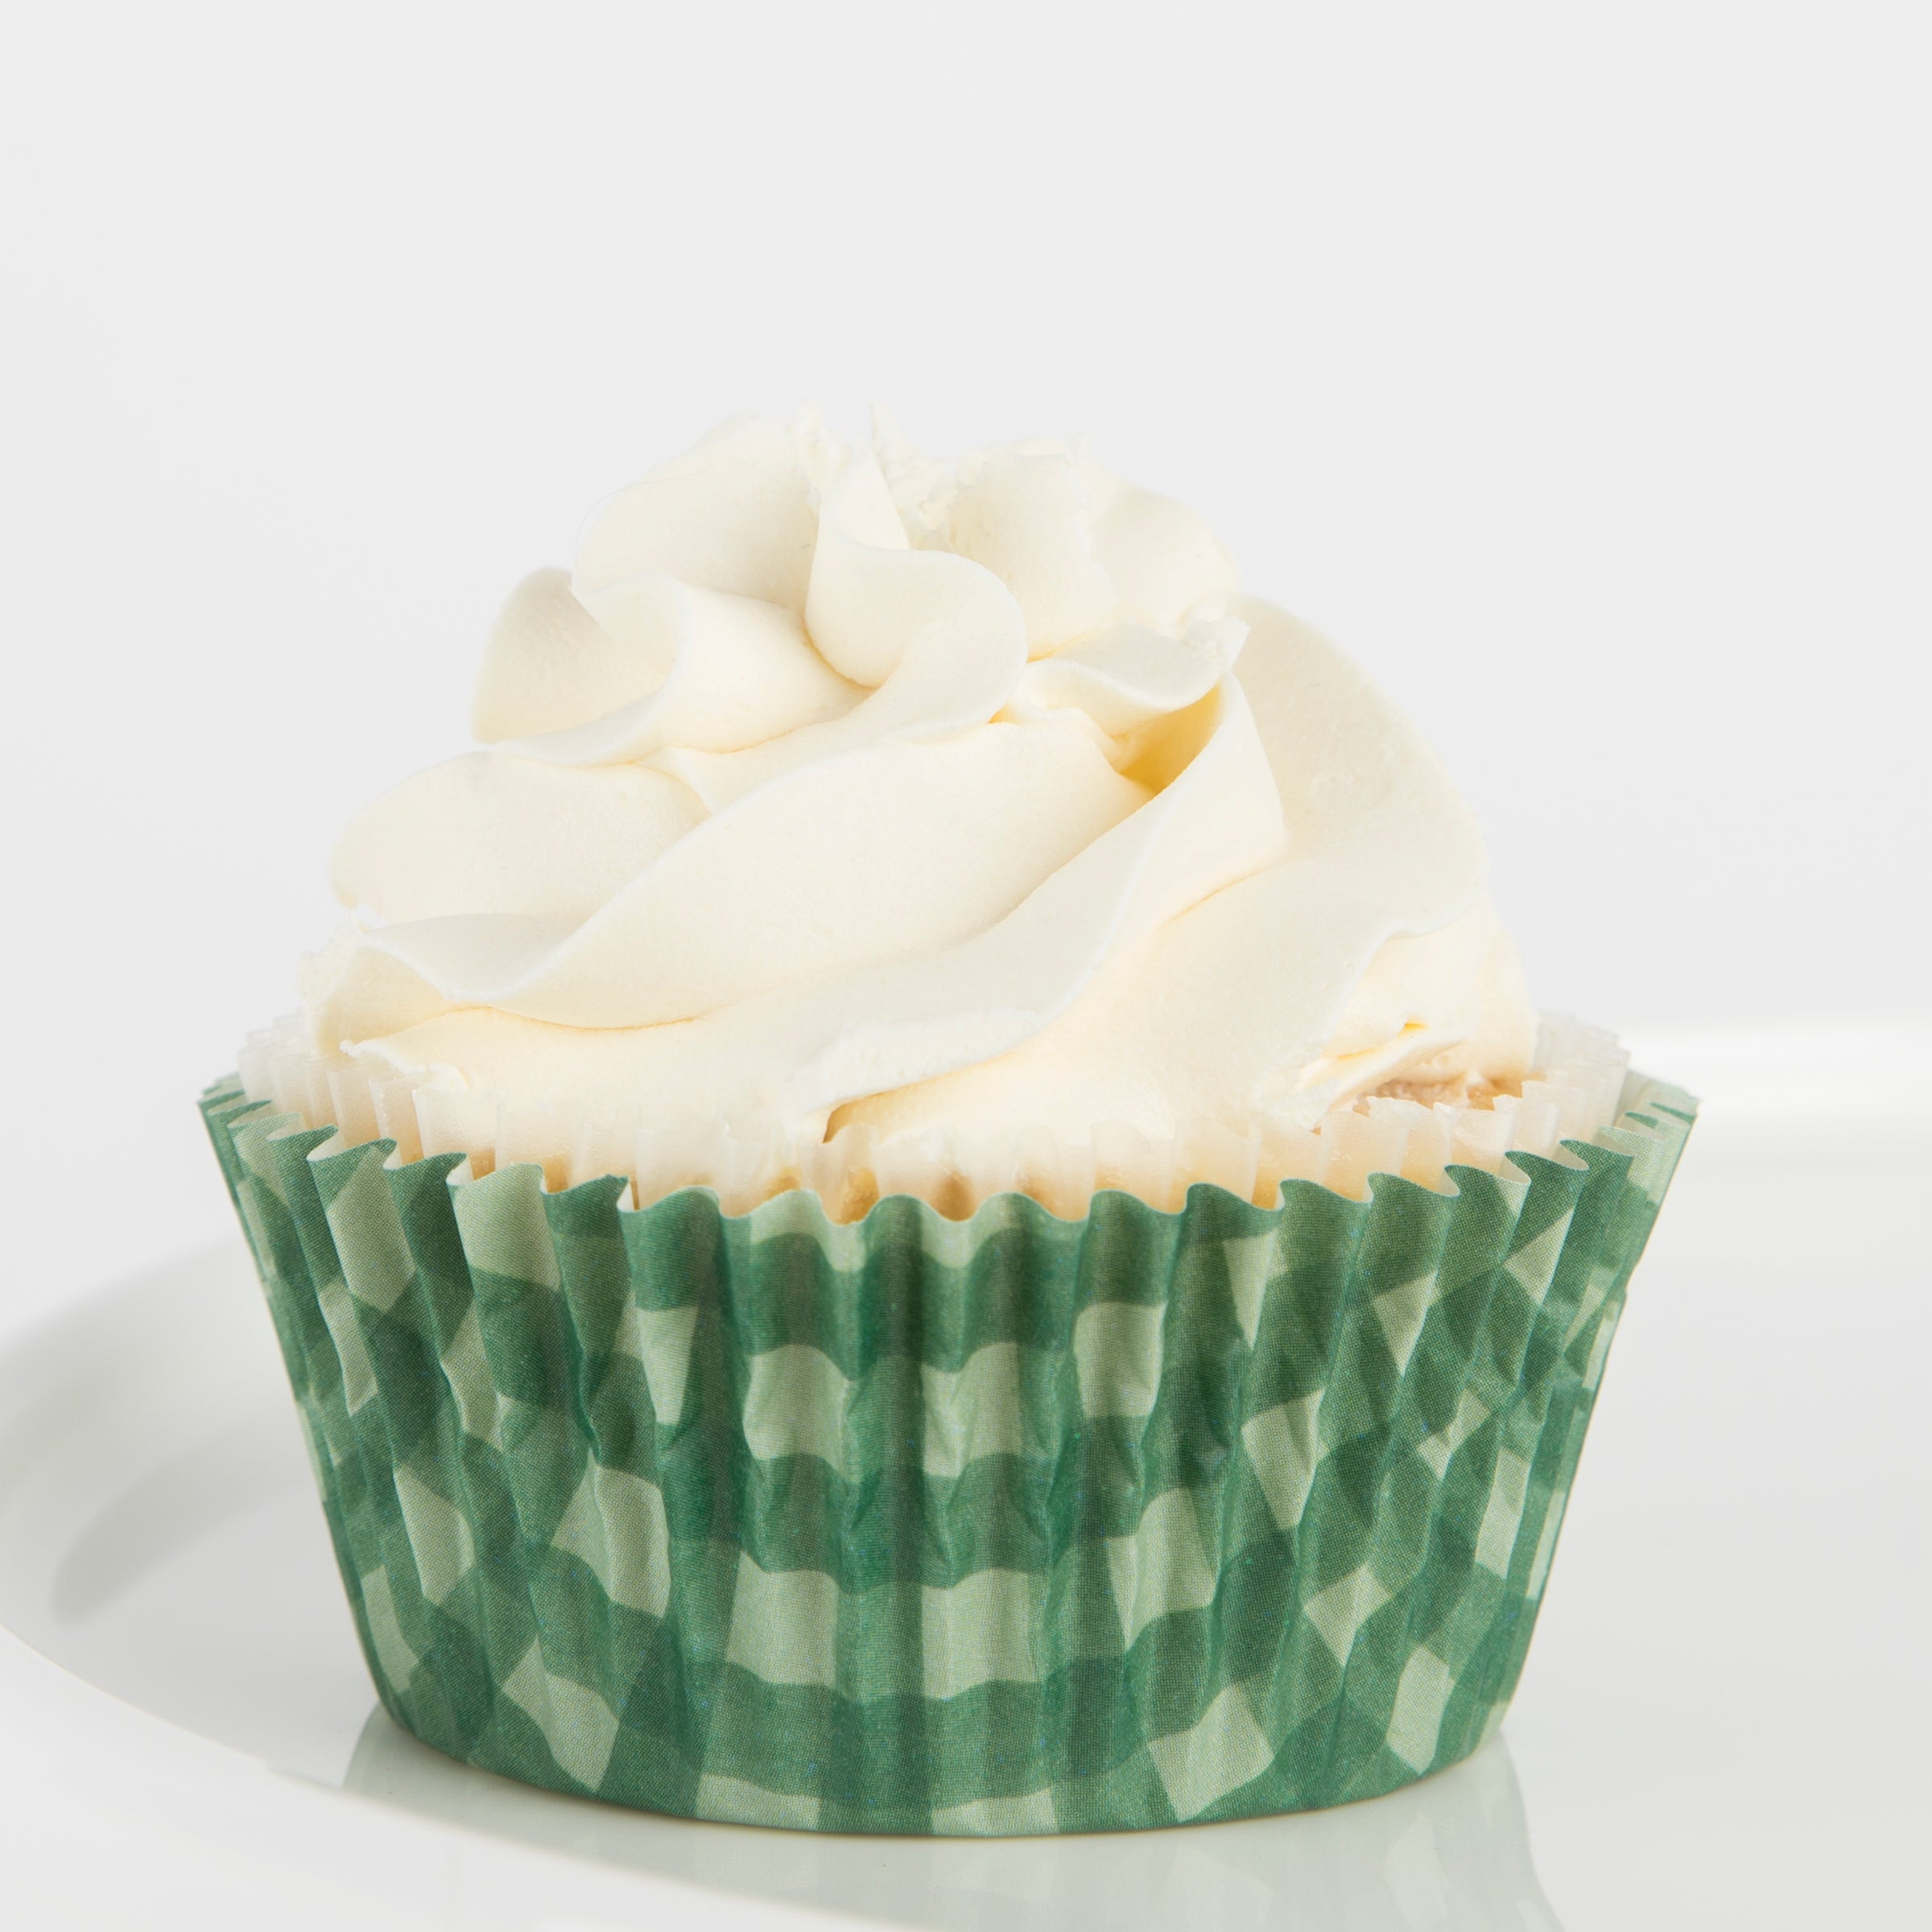 Our kit contains everything you need for cupcake decorations including  cupcake toppers and cupcake cases.